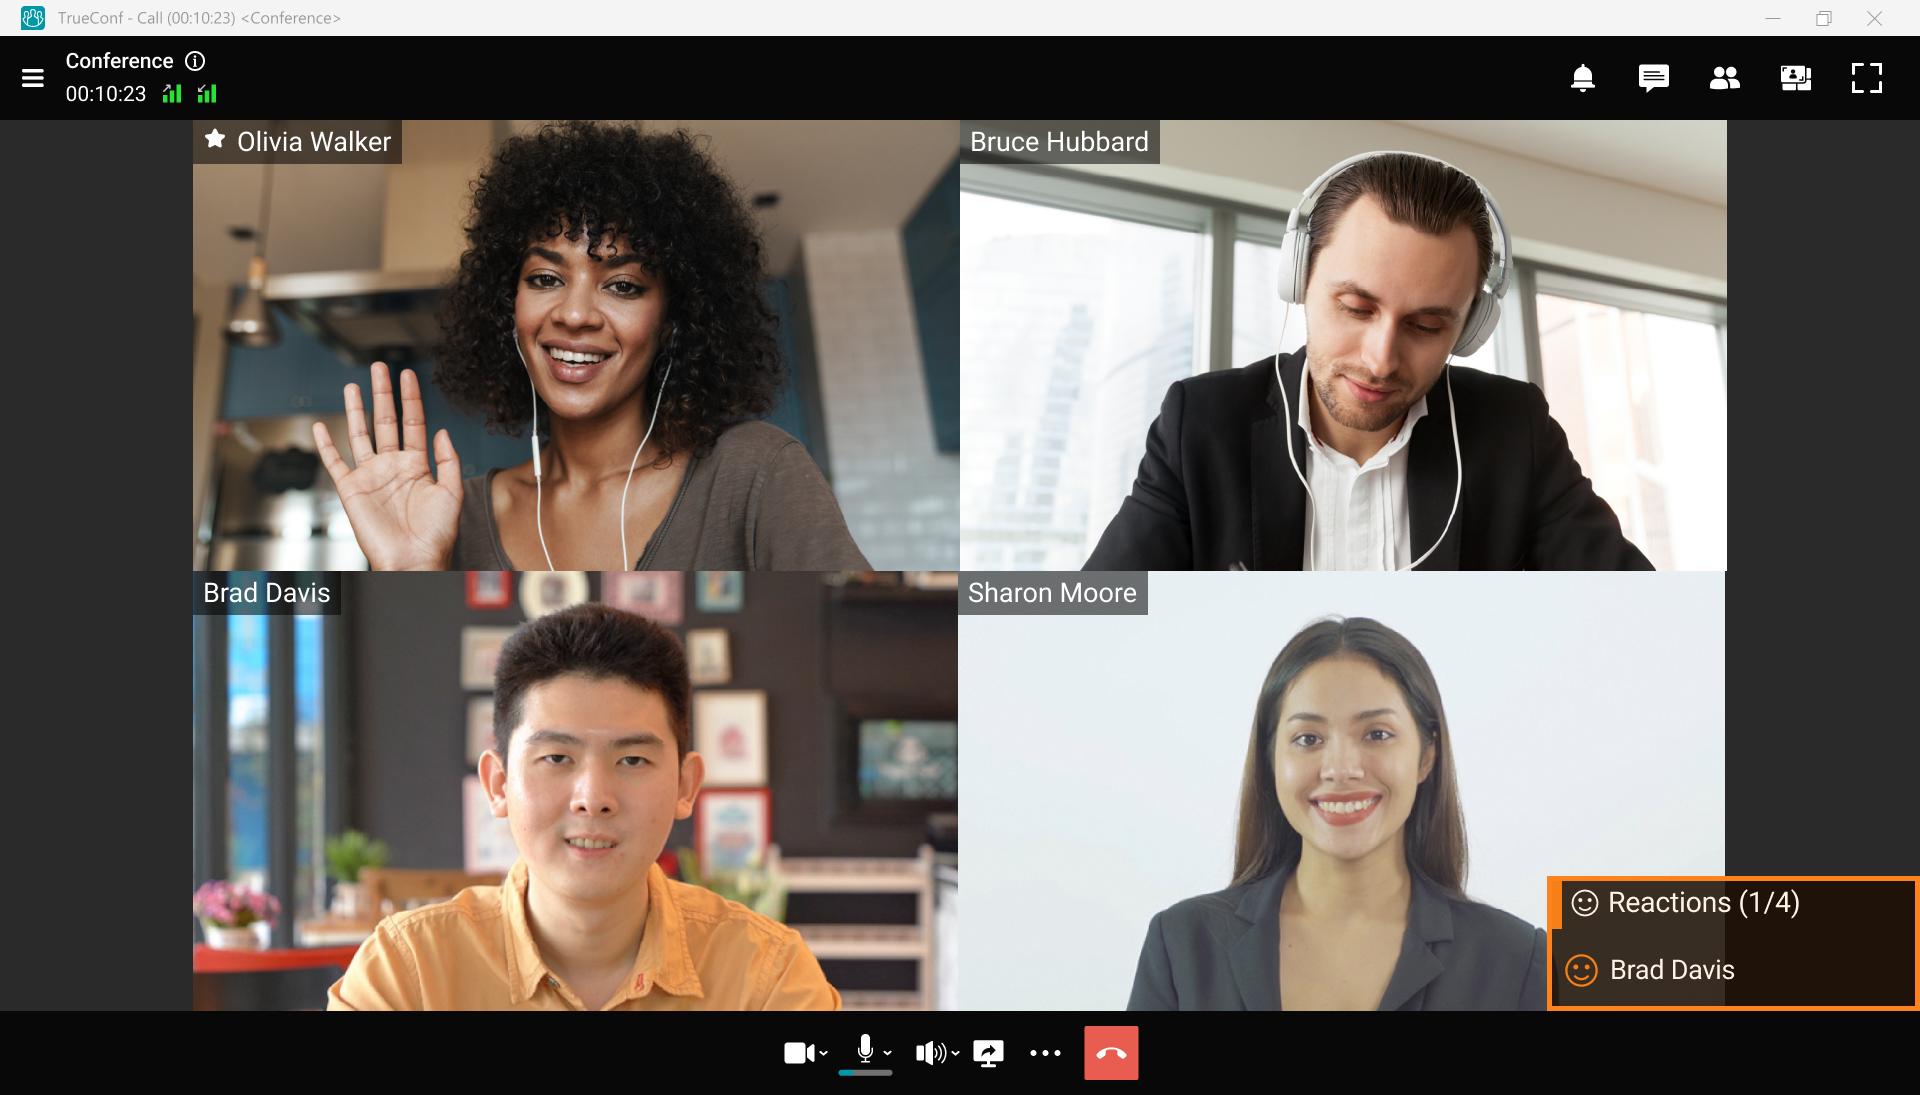 TrueConf 8.1 for Windows: Enhanced team messaging, media player for recordings, and automatic content spotlight 12